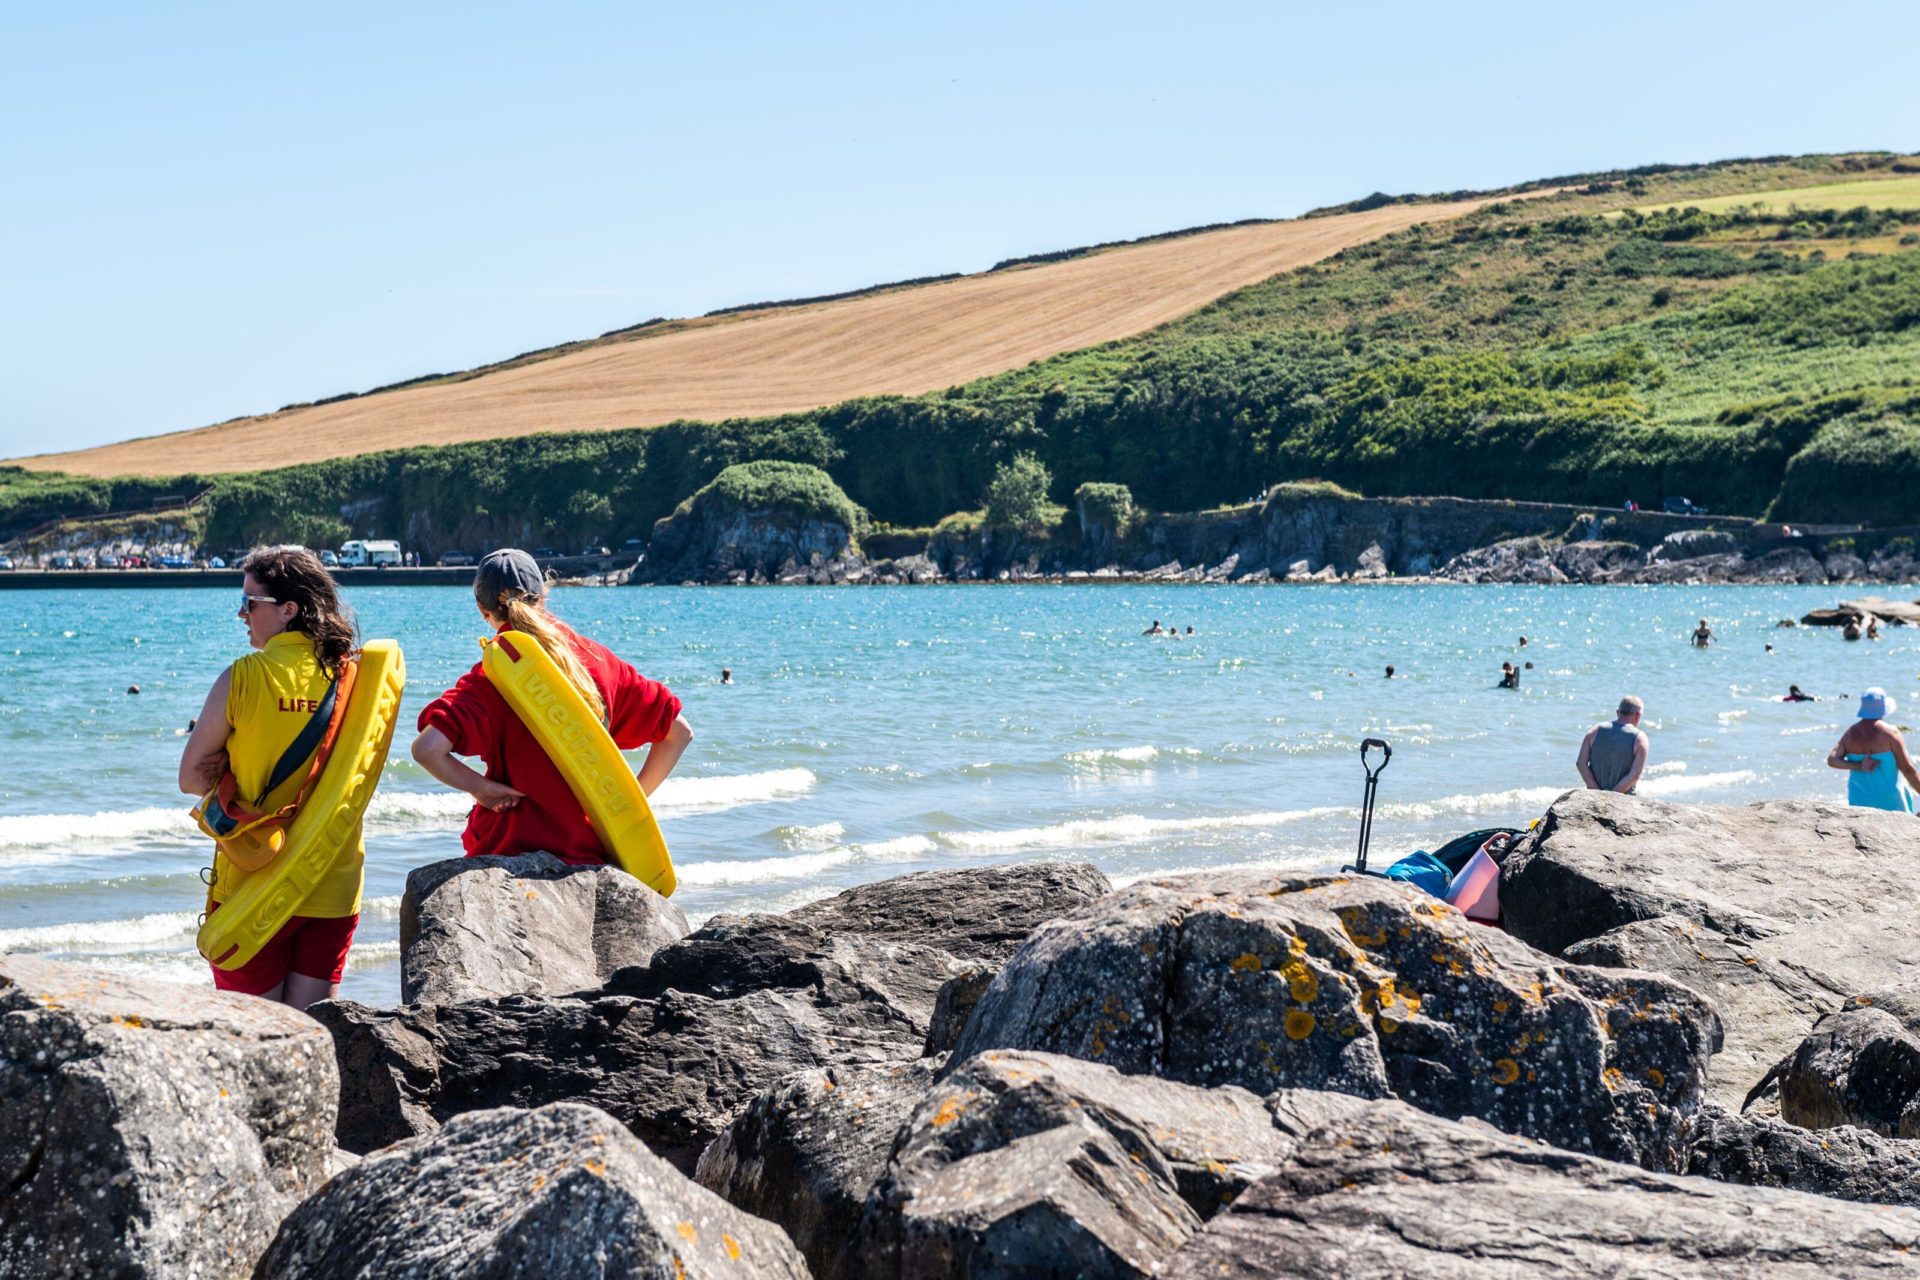 People hit the beach to make the most of the hot weather Rosscarbery, West Cork, 10-07-2022. Image: AG News/Alamy Live News